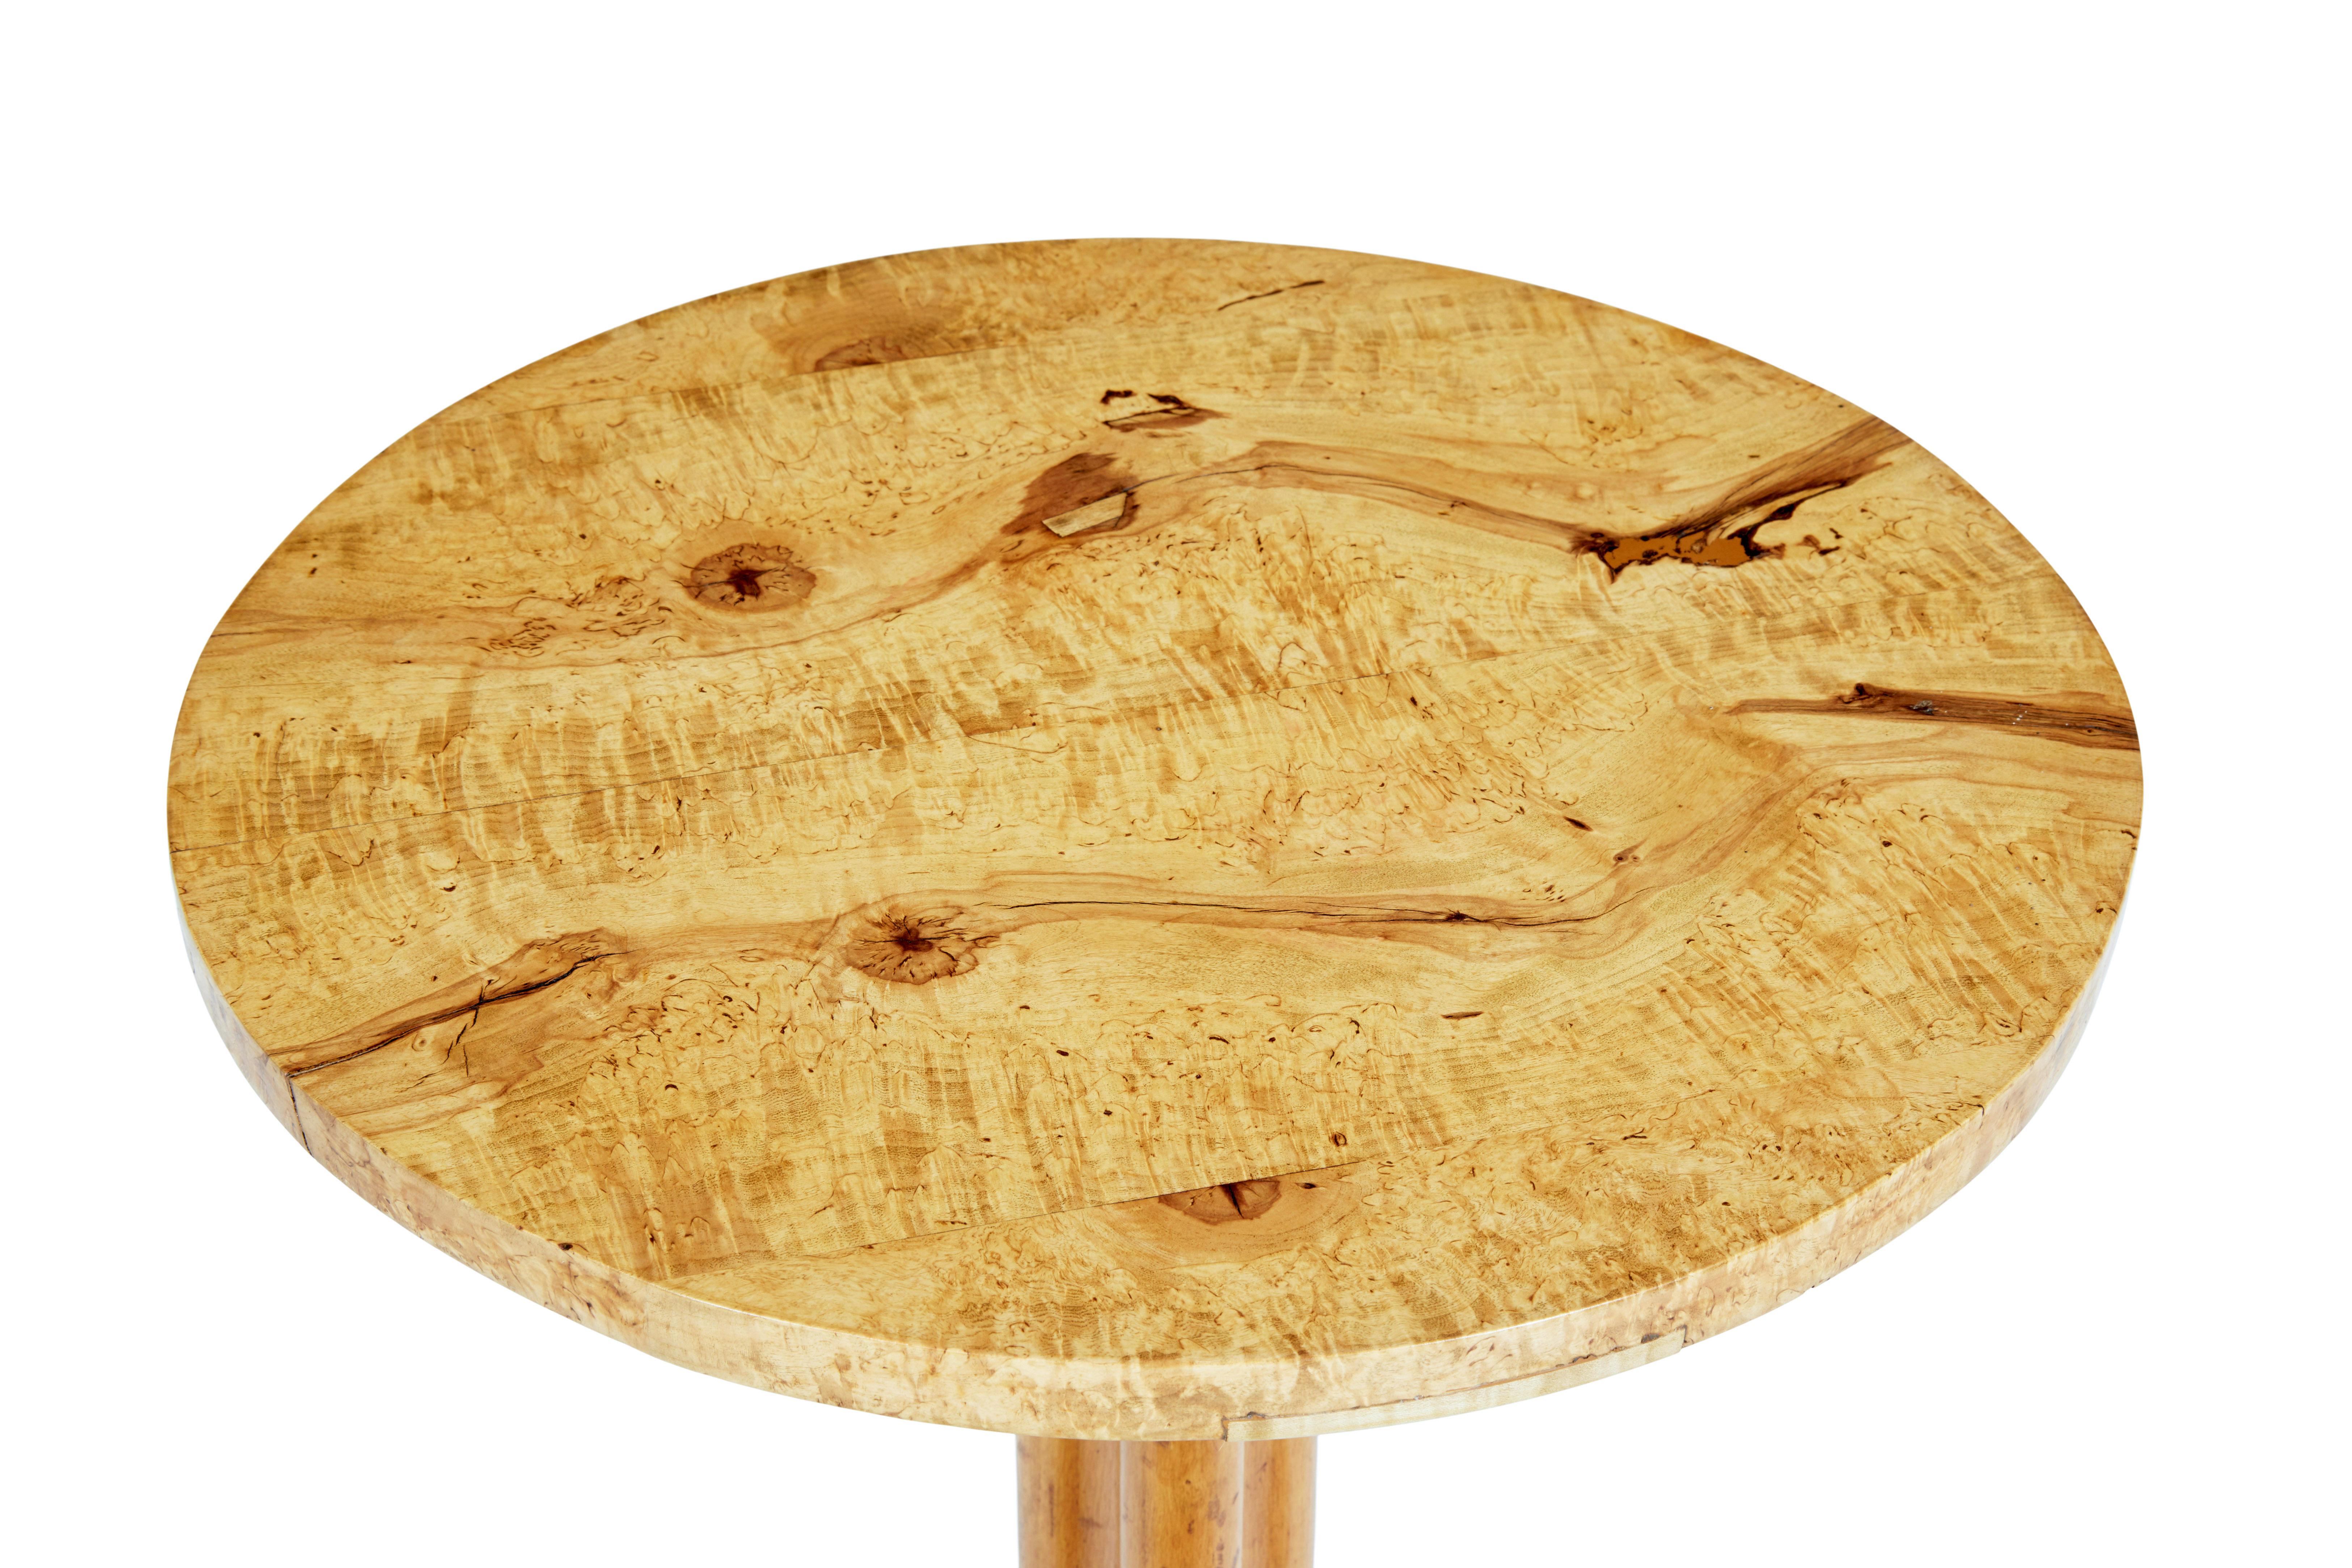 Good quality Swedish birch root table, solid burr birch circular top, standing on shaped stem and scrolled legs.
Rich golden colour.
Area of restoration to the top were a wood knot was, but this has been done sympathetically and when the table was